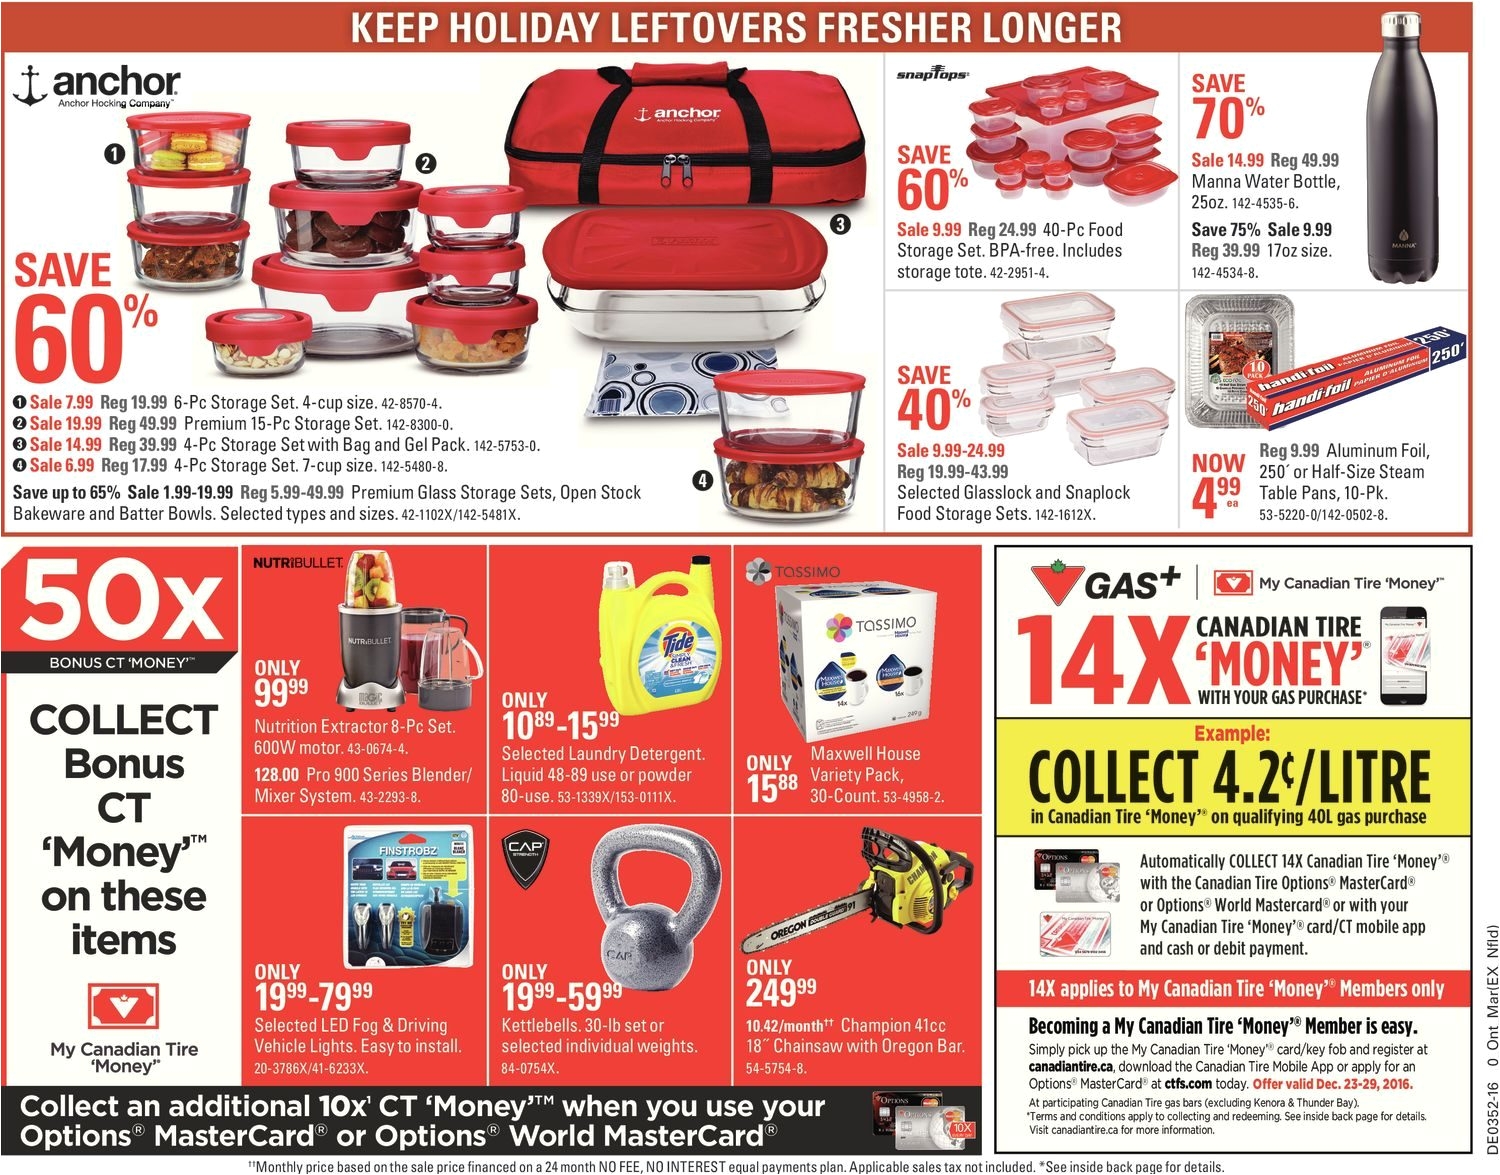 Canadian Tire Fireplace Gasket Canadian Tire Weekly Flyer Weekly Restart Recharge Dec 23